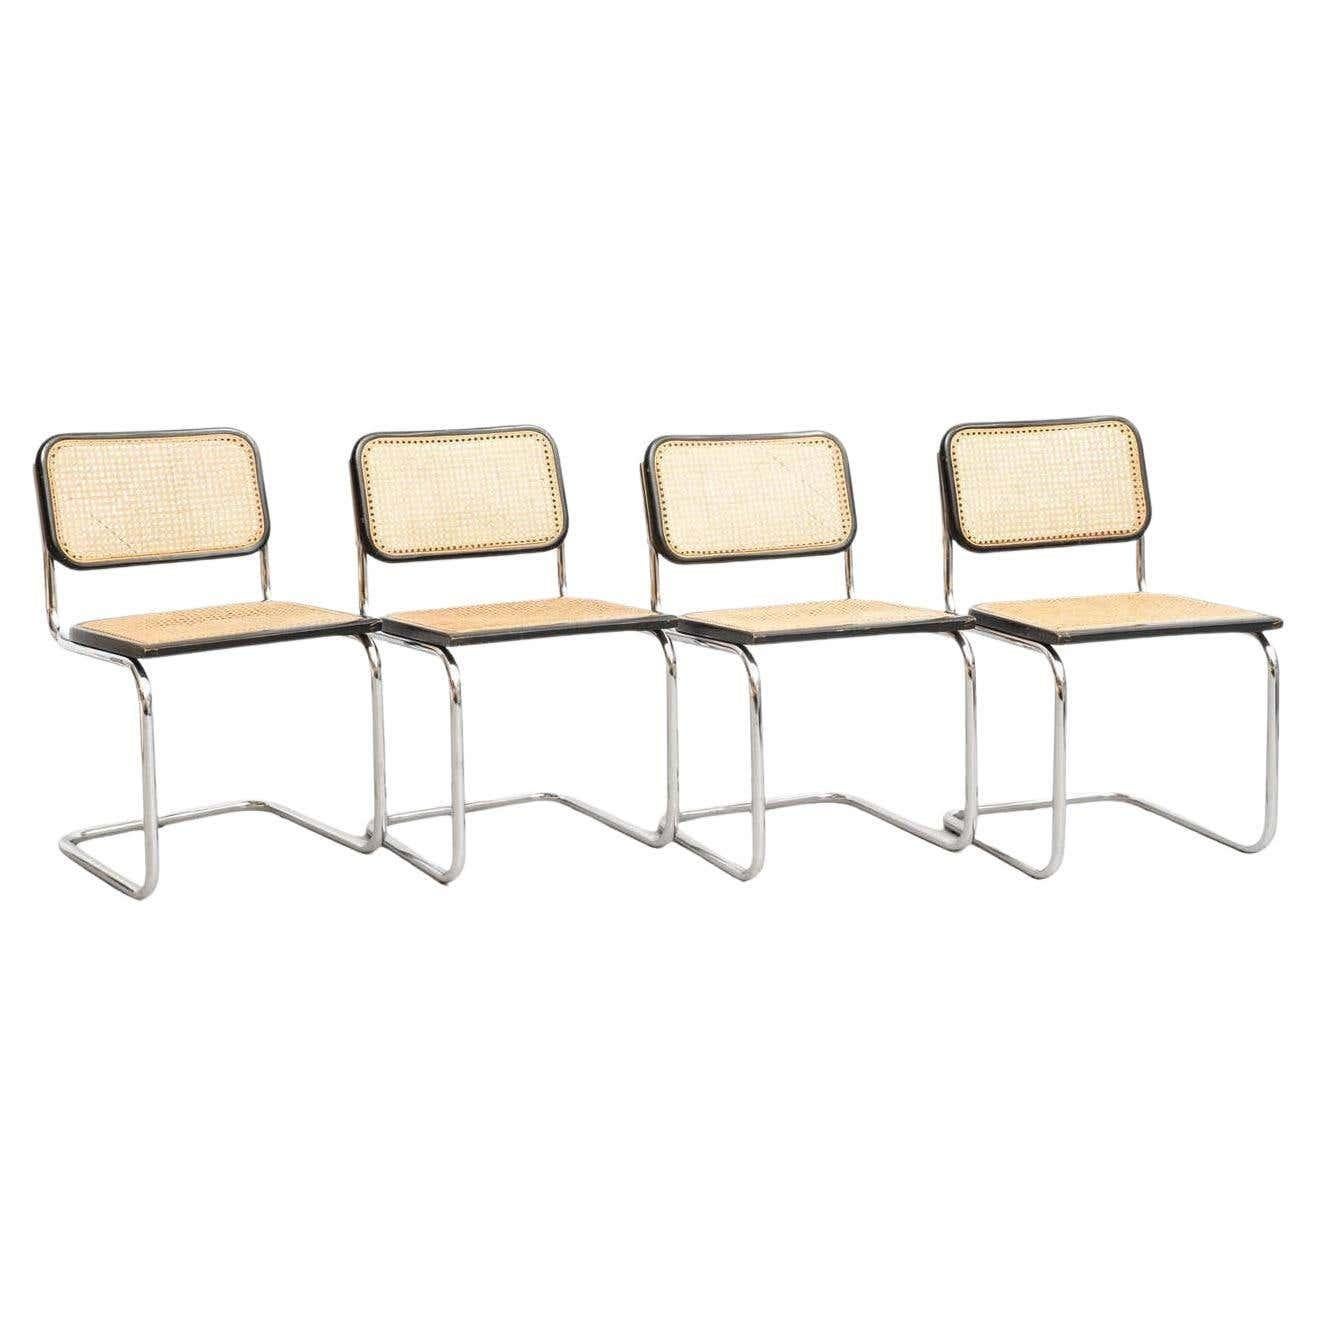 Set of 4 Marcel Breuer Cesca Metal and Wood Mid-Century Modern Chairs, c 1960 For Sale 14